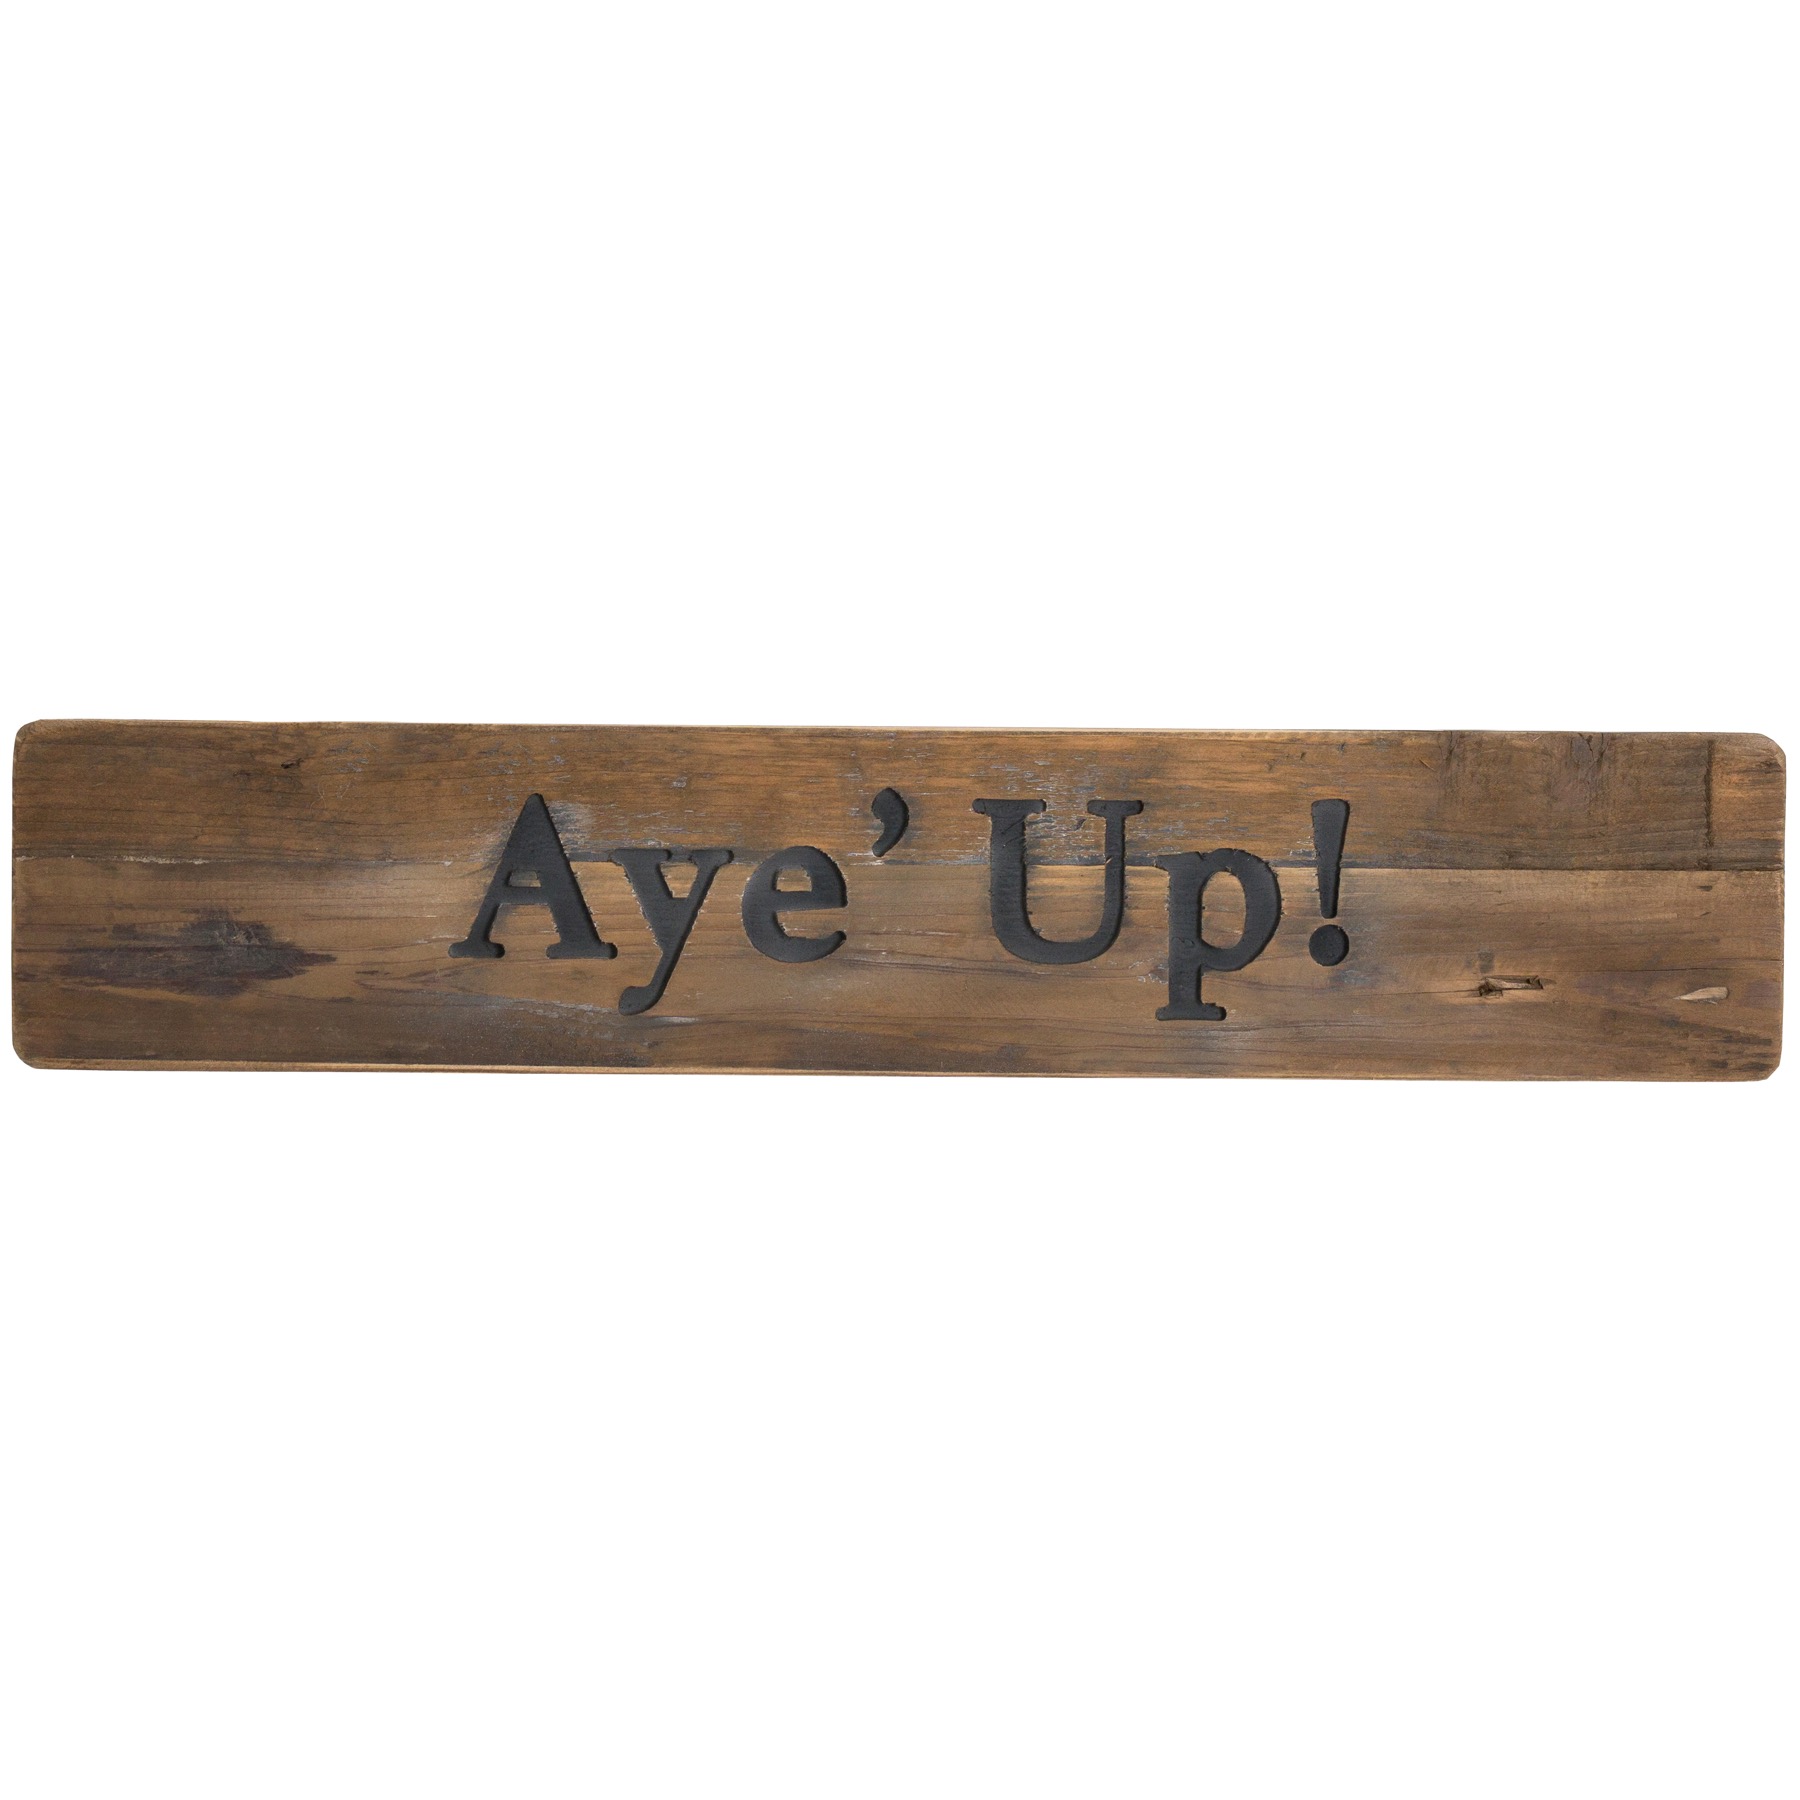 Aye' Up Rustic Wooden Message Plaque - Image 1